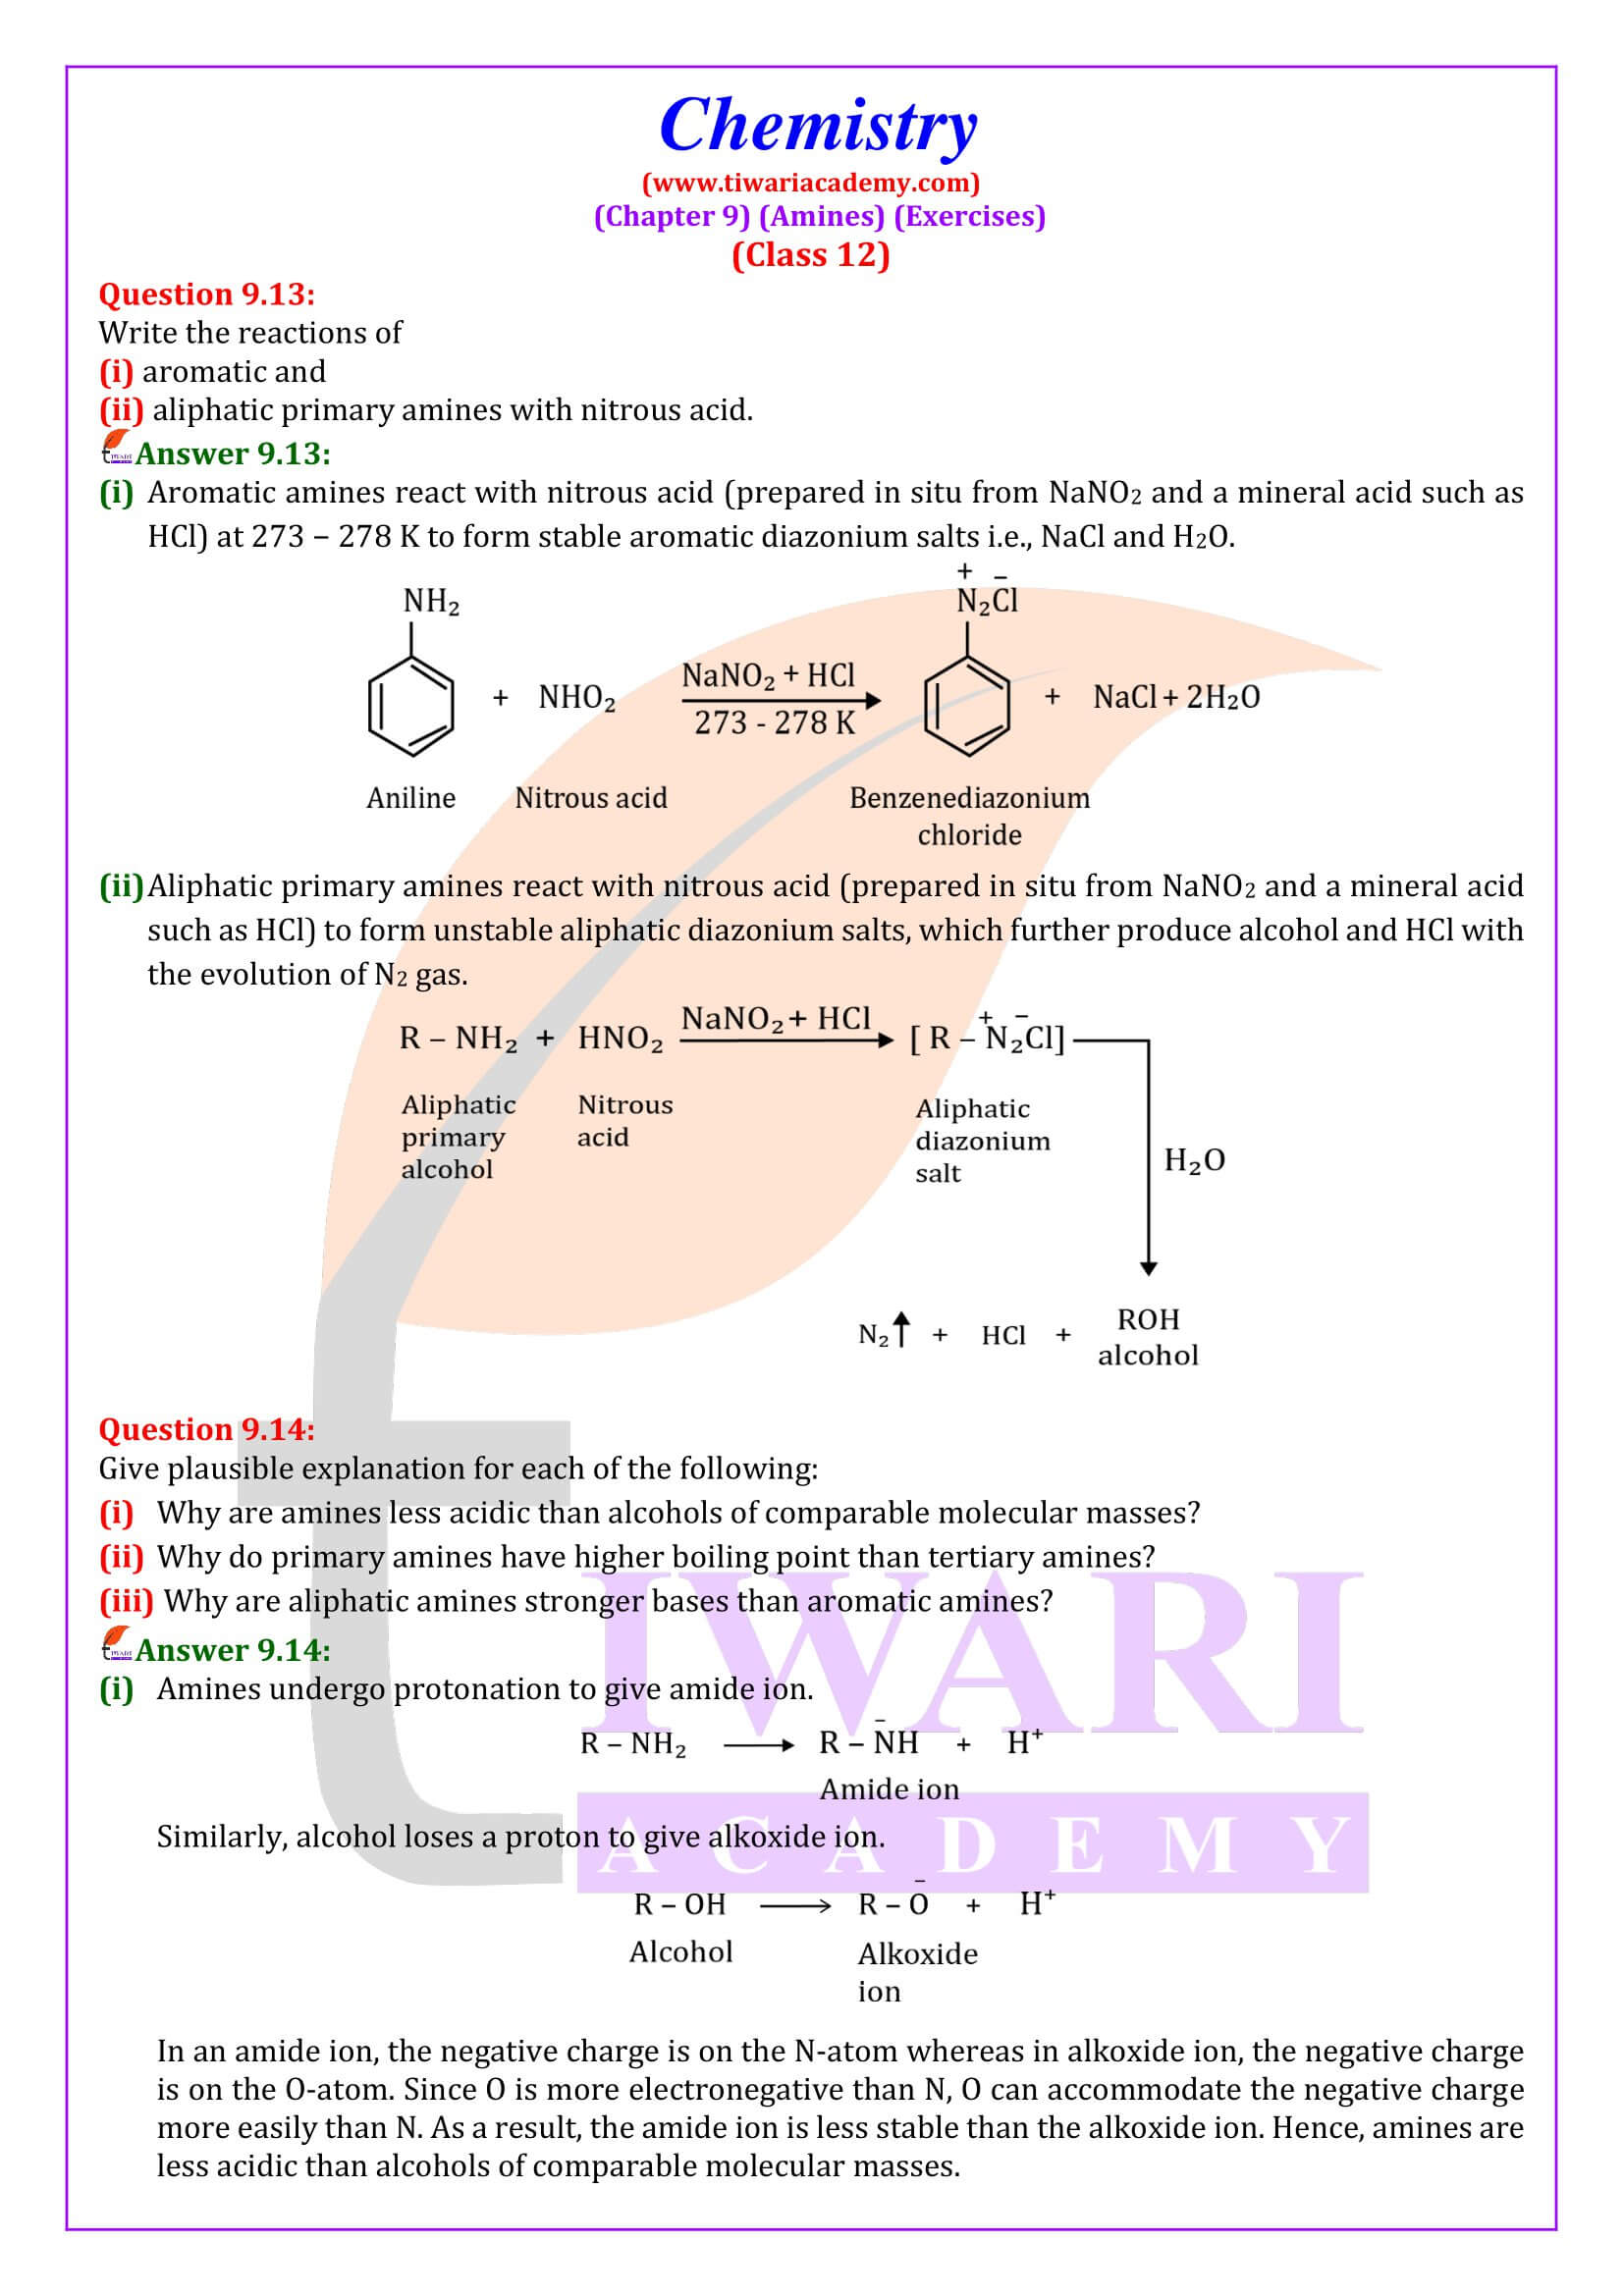 Class 12 Chemistry Chapter 9 Exercise Answers